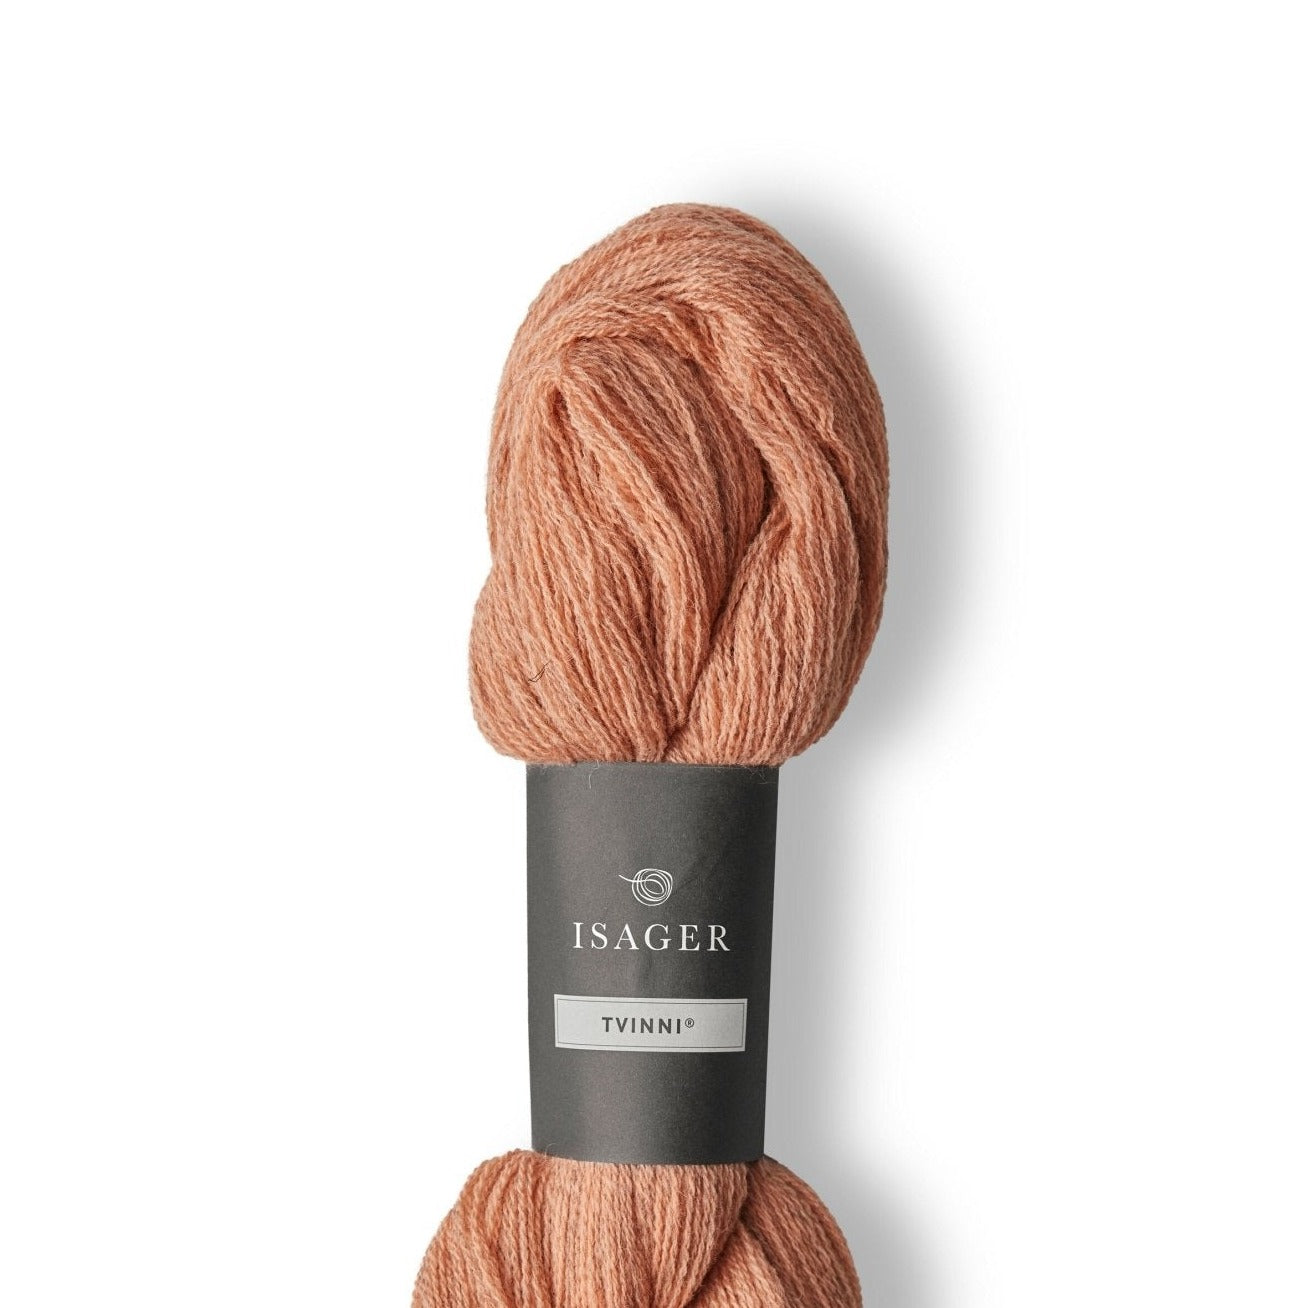 Isager Tvinni - 39s - 4 Ply - Isager - The Little Yarn Store